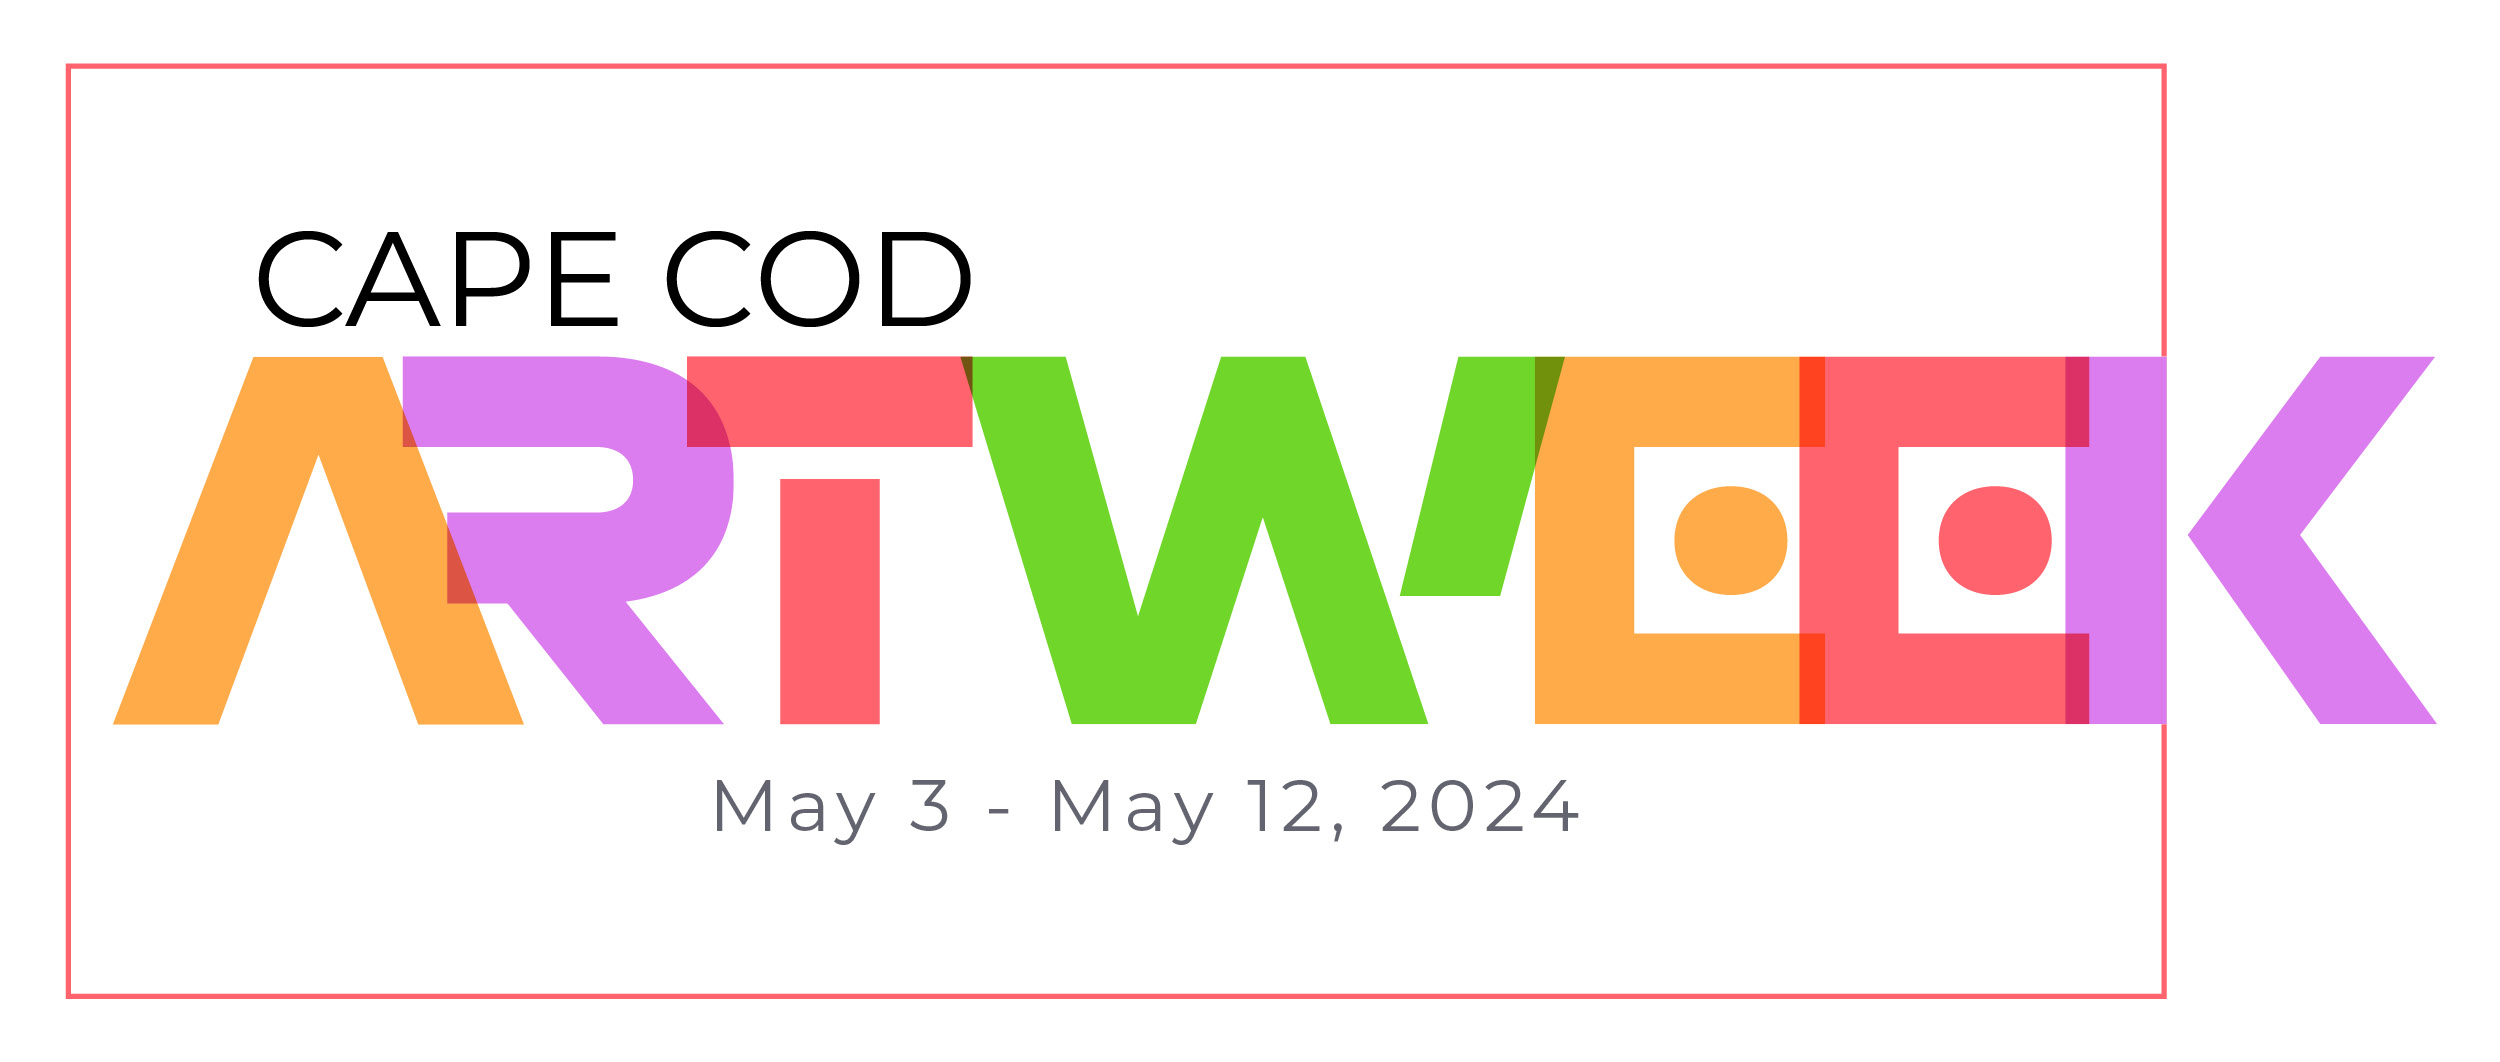 Cape Cod ArtWeek May 3rd to May 12th 2024